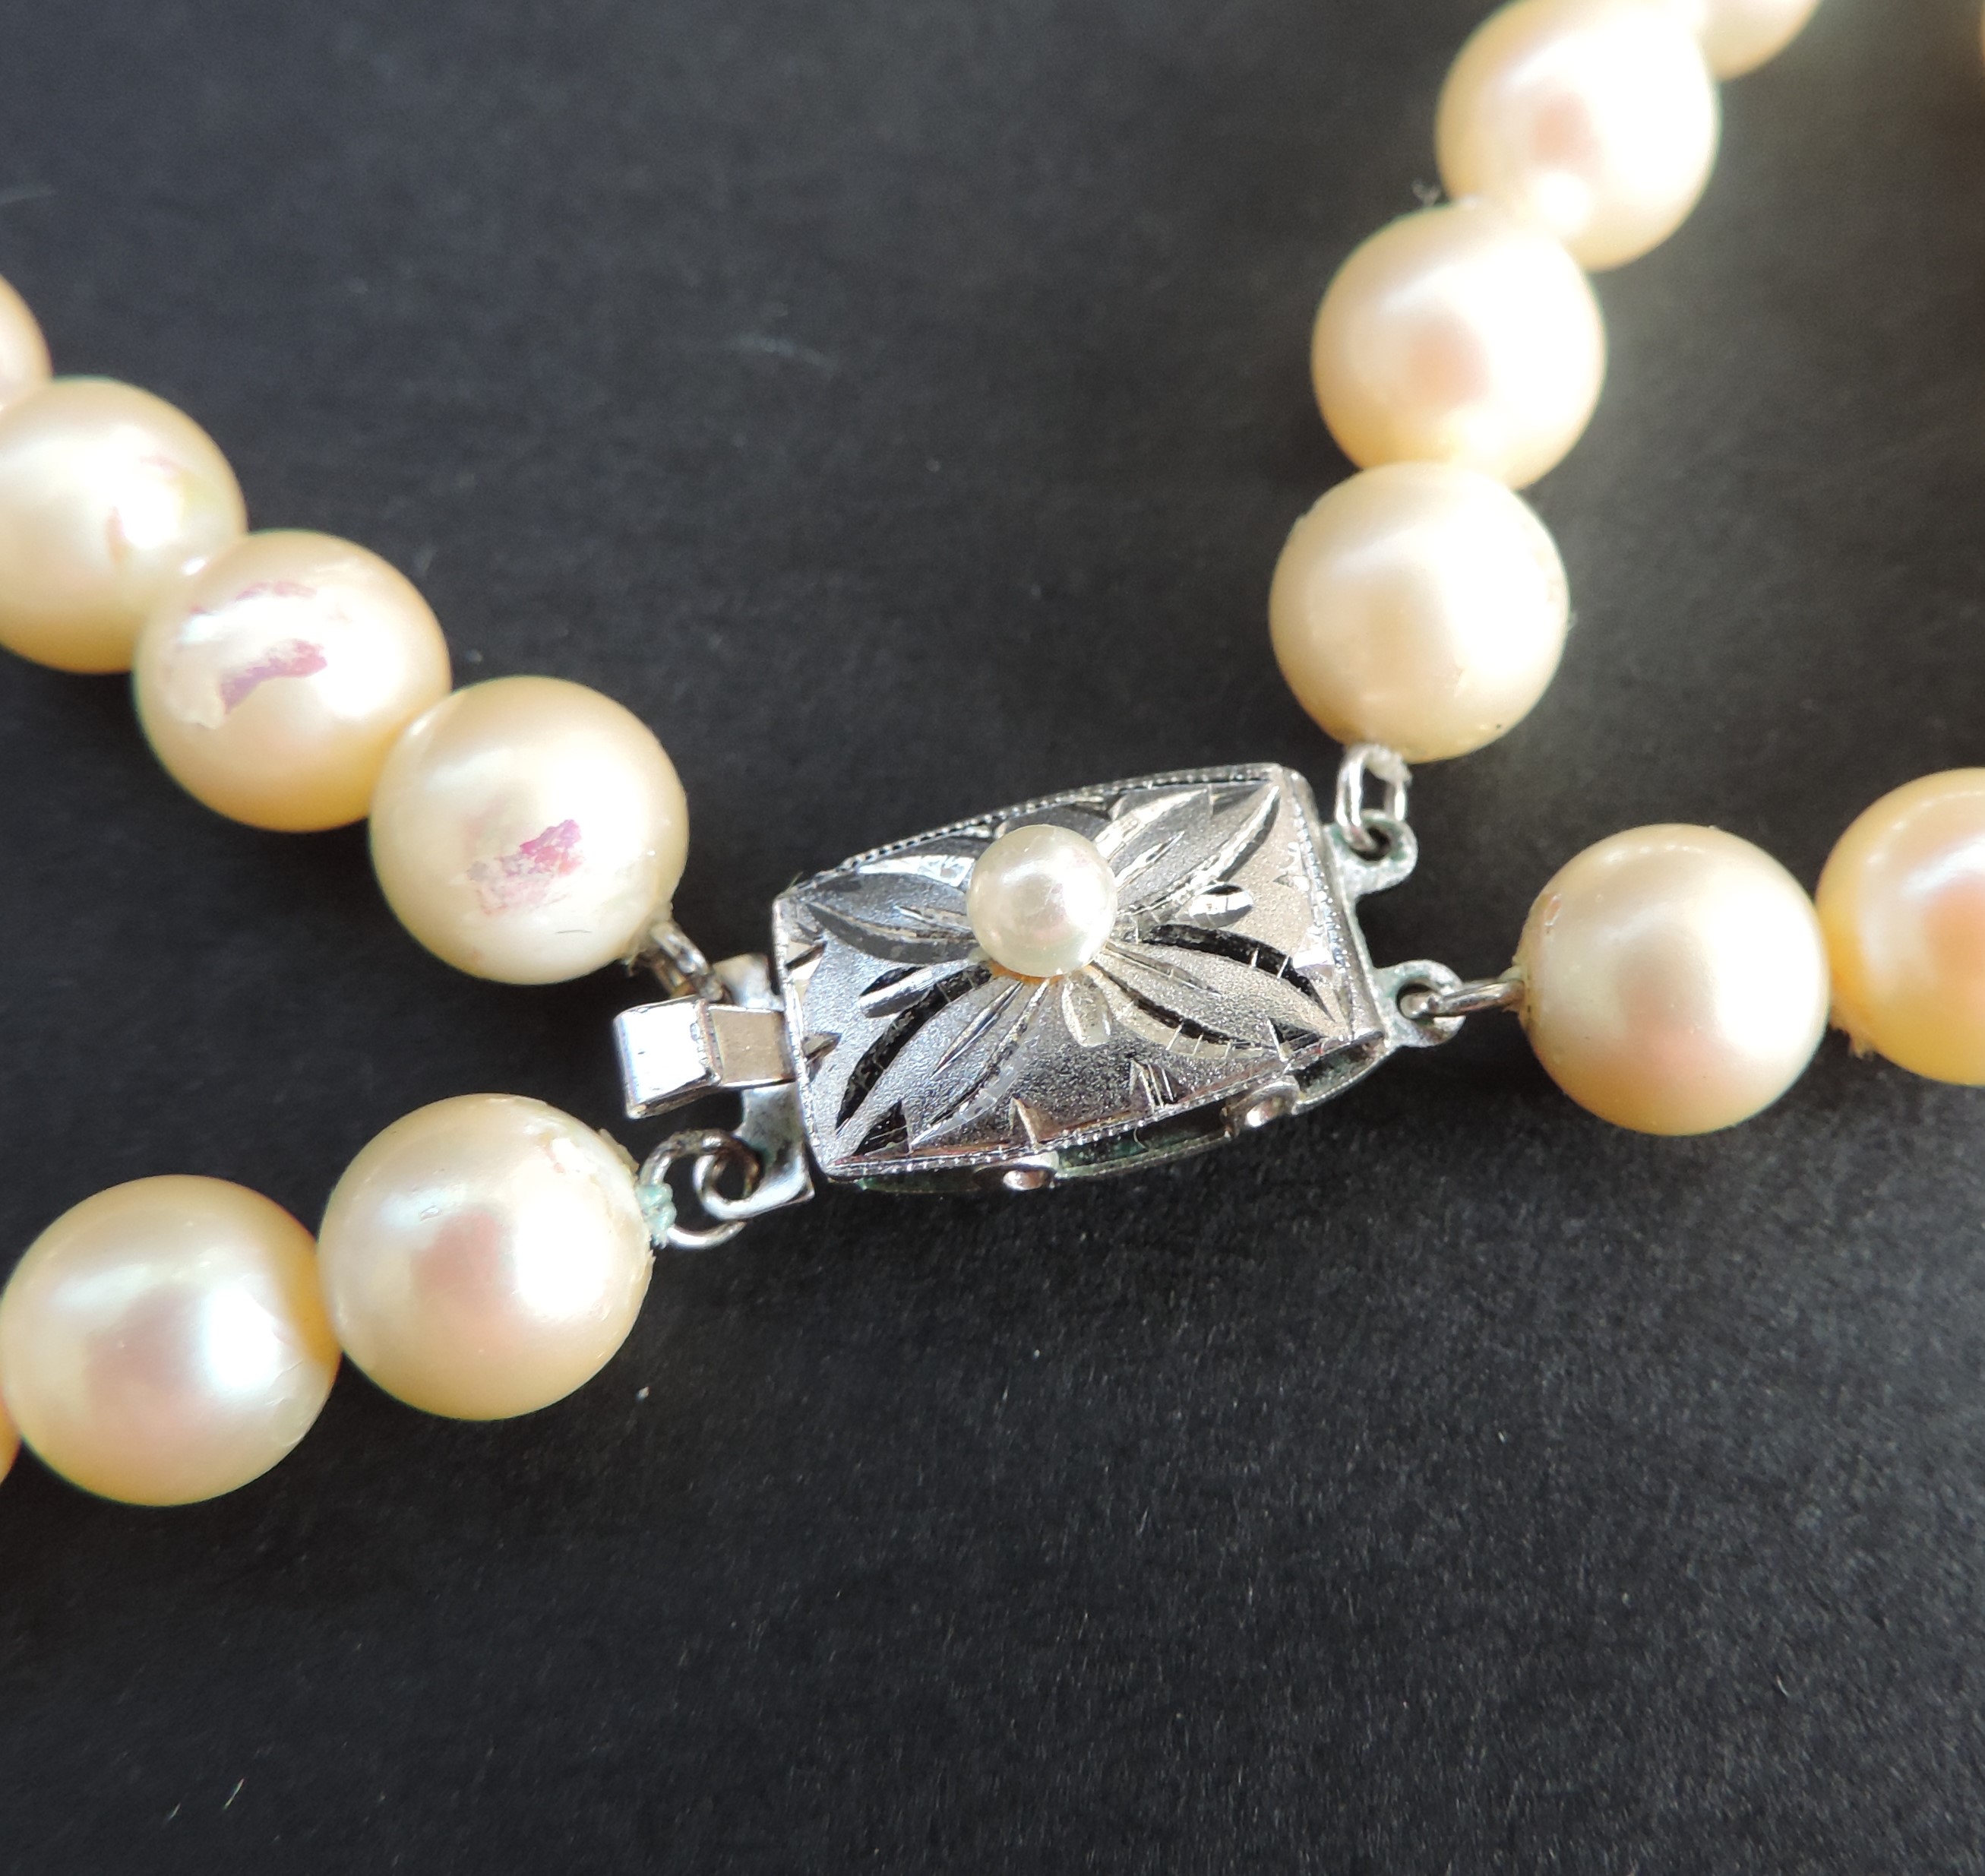 Vintage Pearl Necklace Silver Clasp - Image 4 of 4